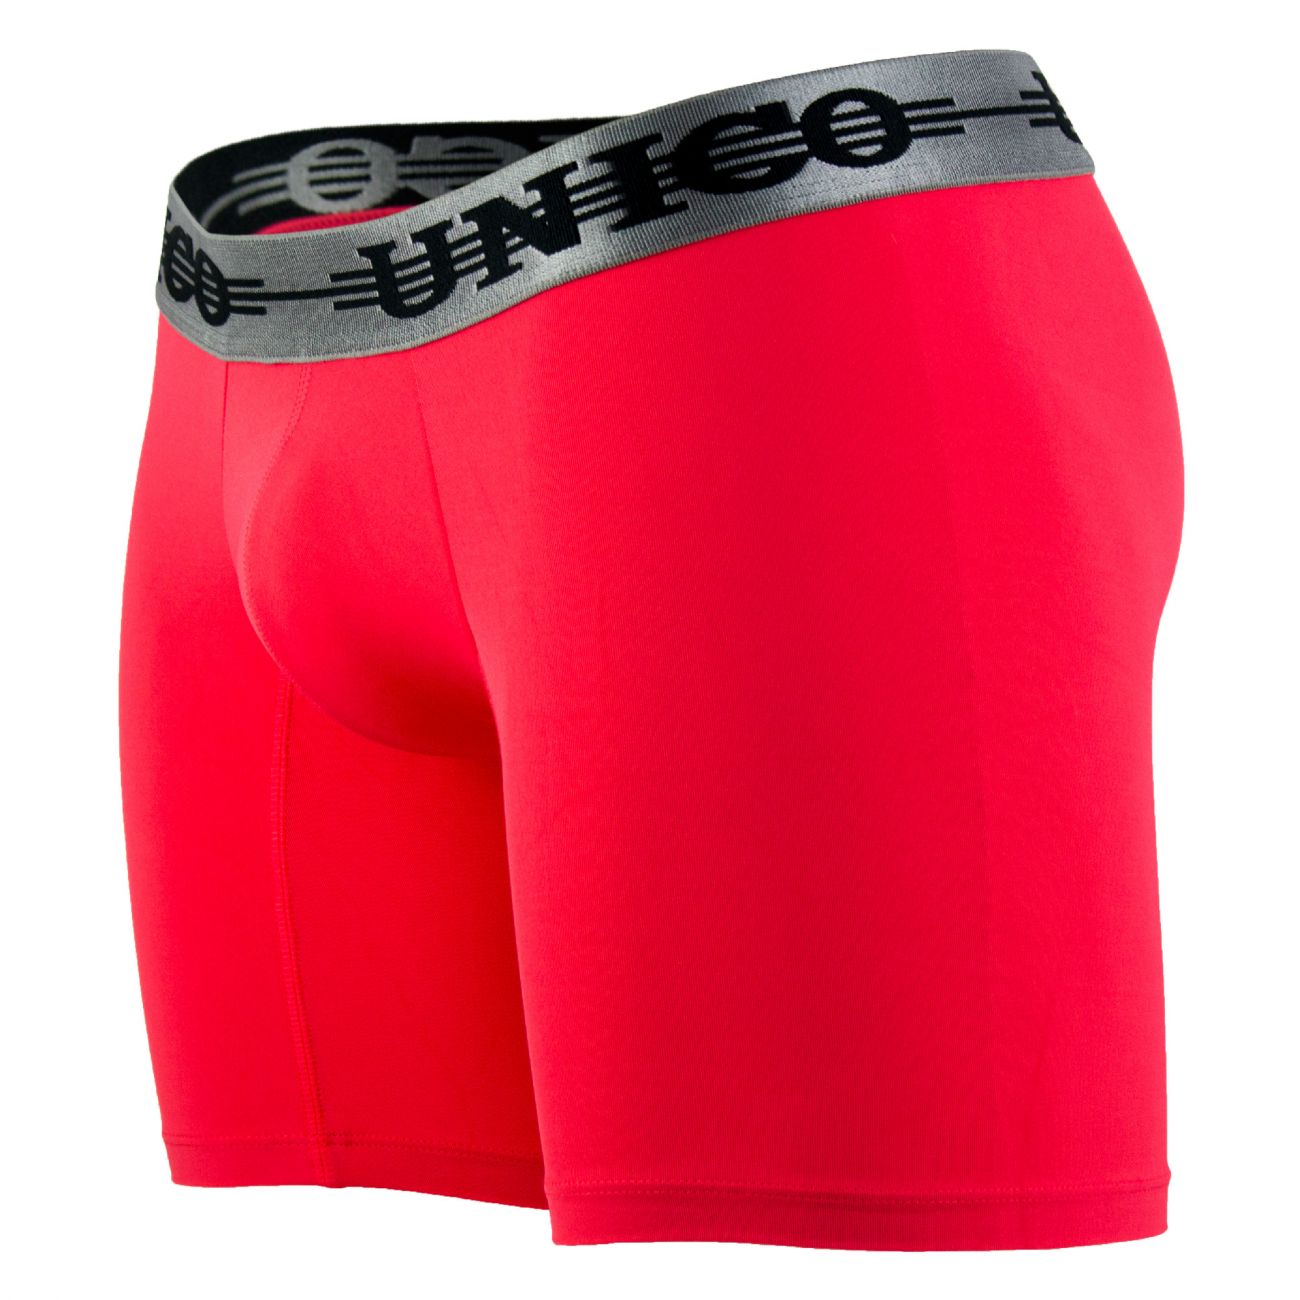 Unico 1802010020955 Boxer Briefs Ying